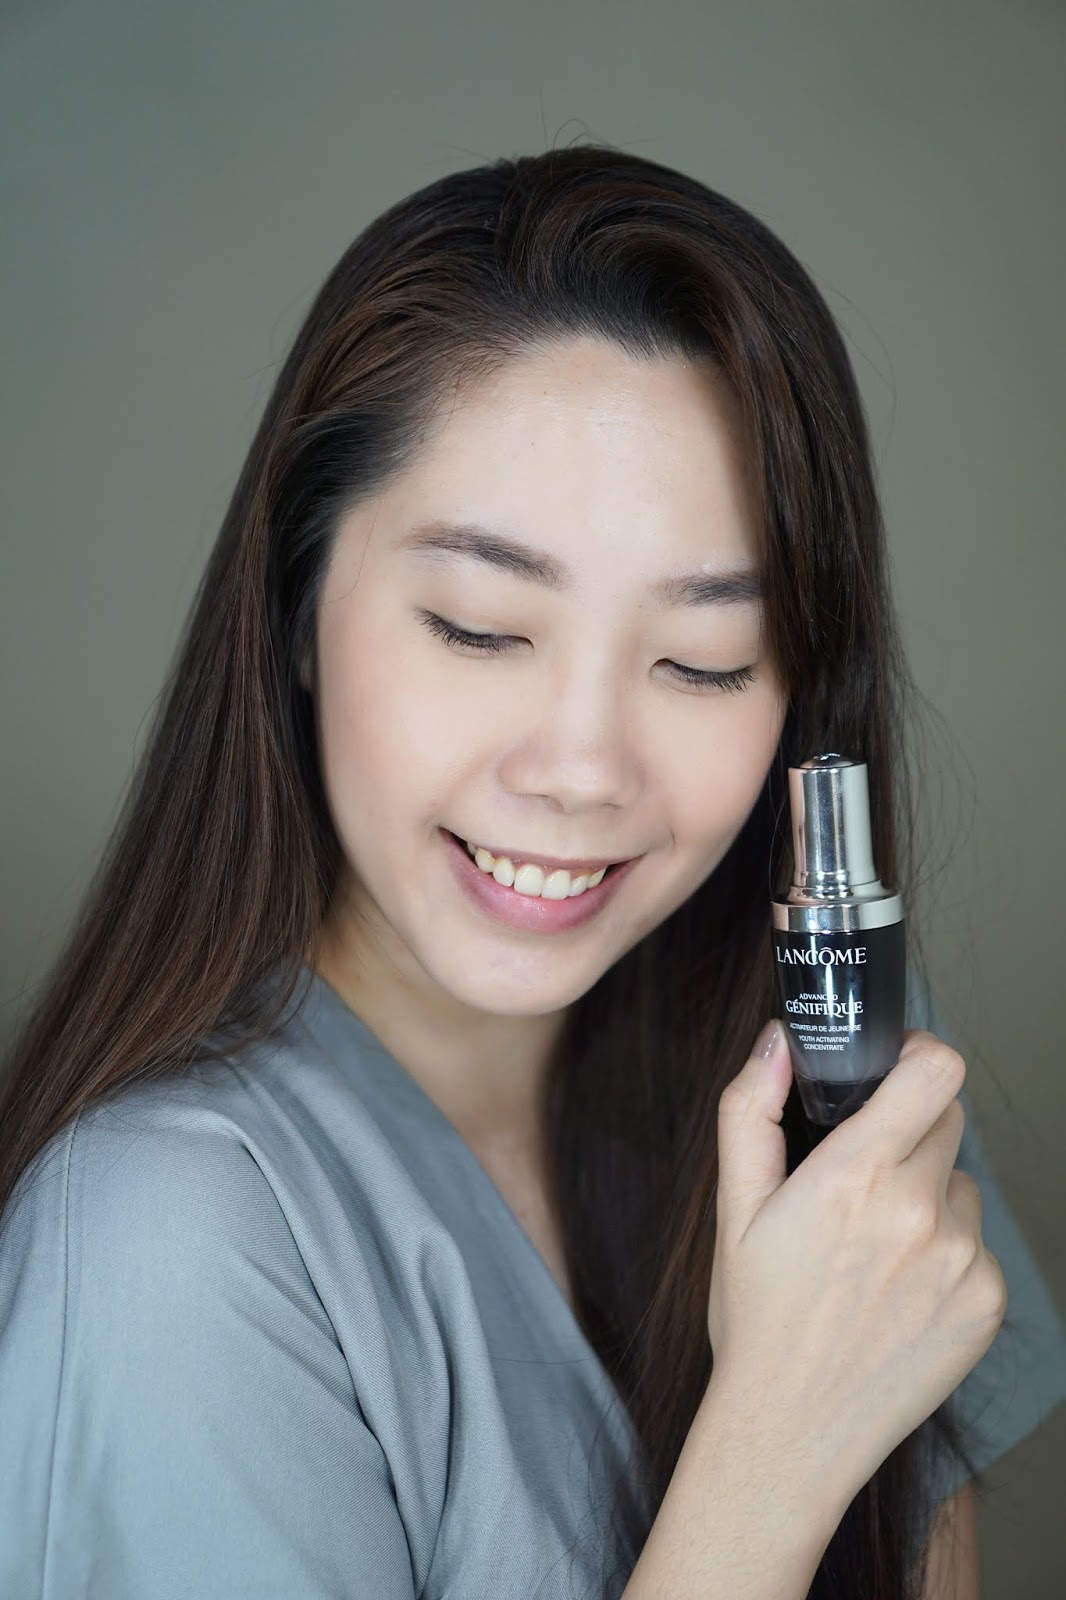 tinh chat tre hoa duong da lancome advanced genifique youth activating serum